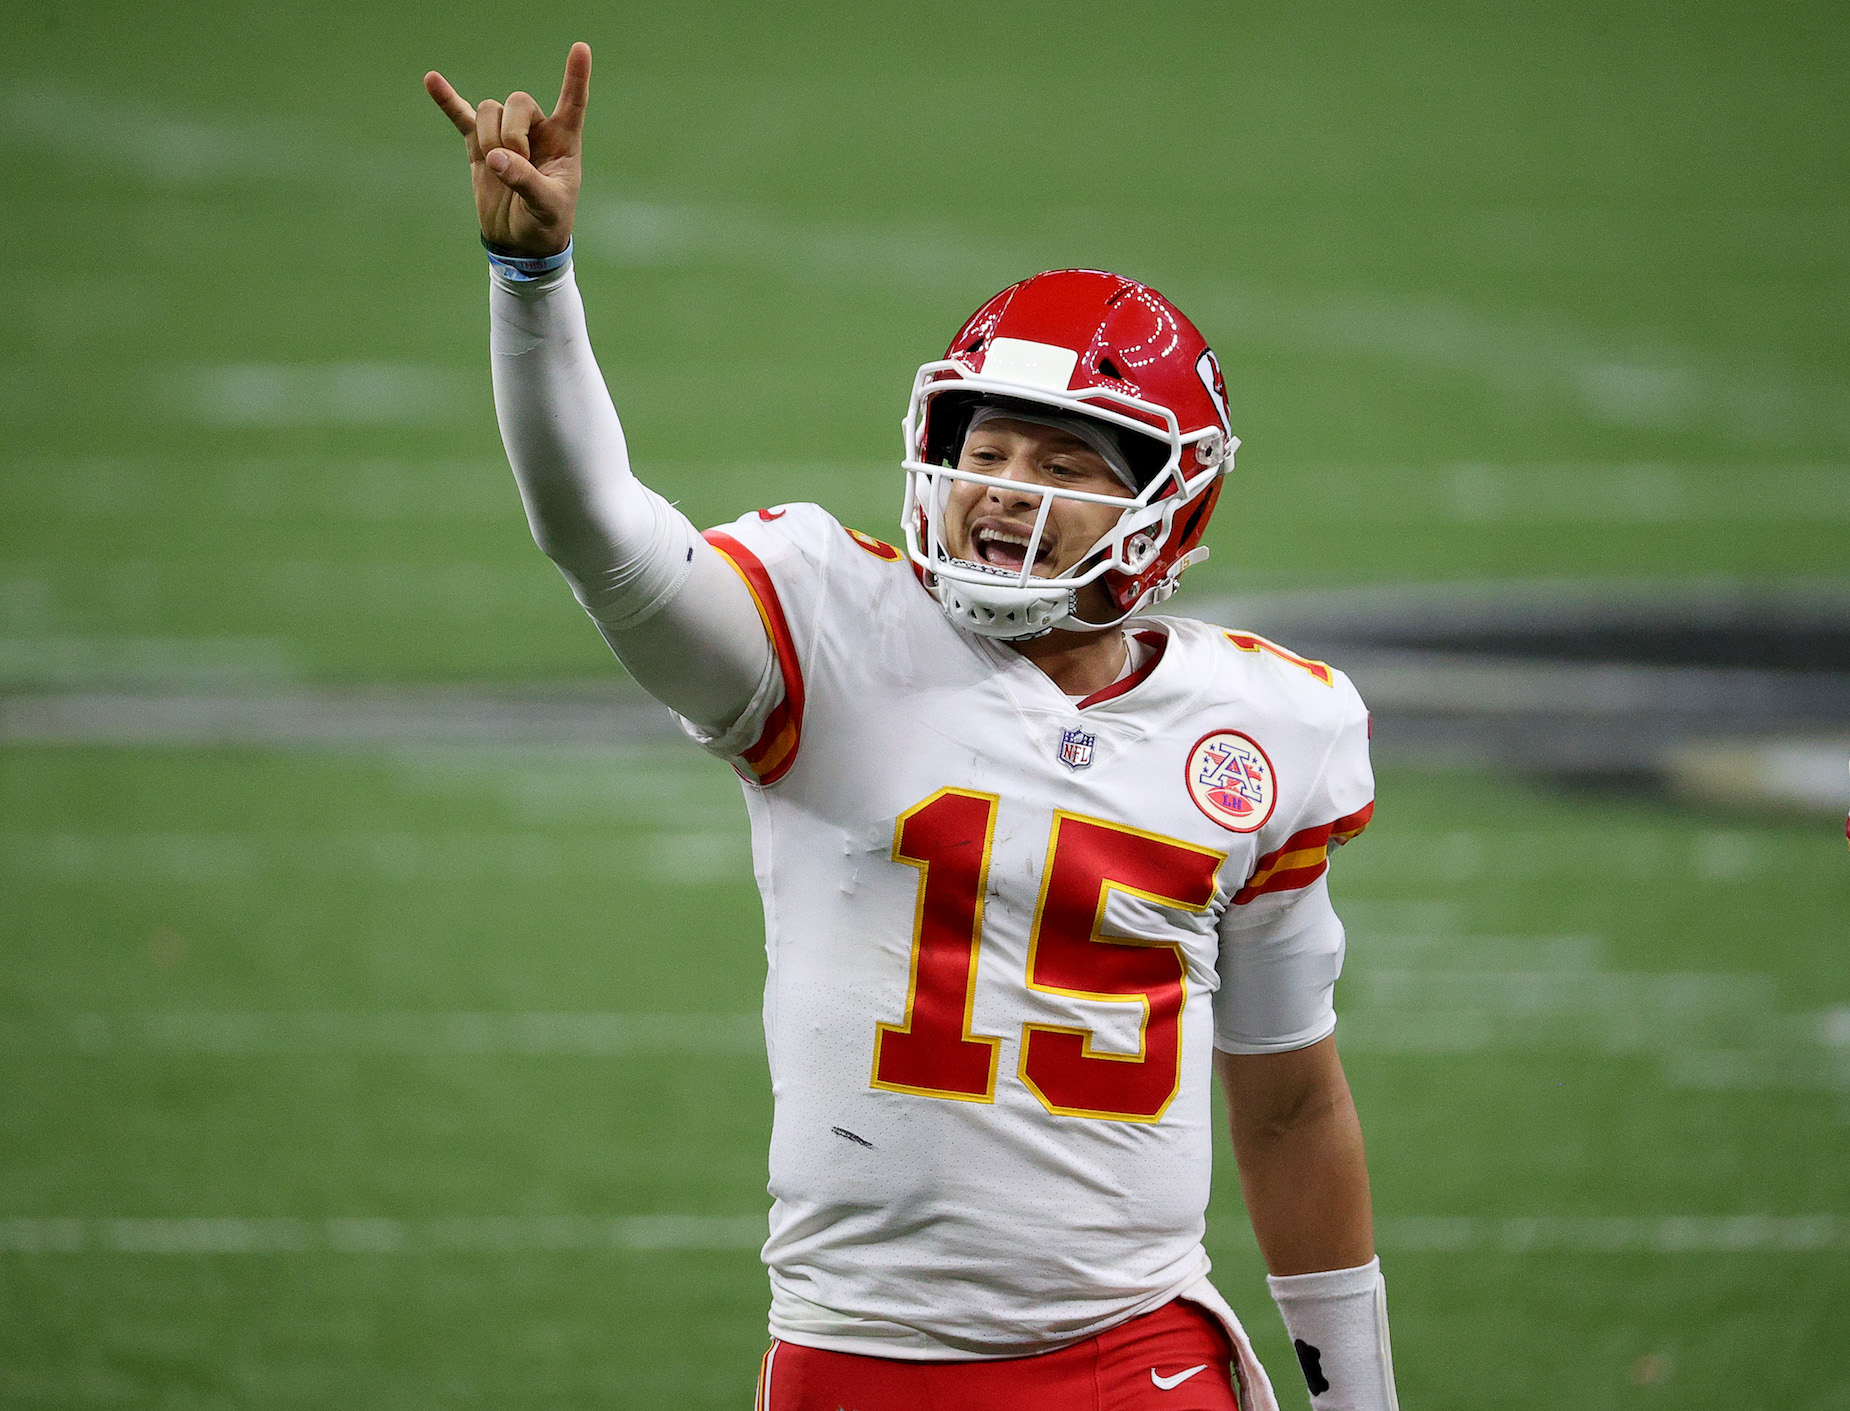 Kansas City Chiefs quarterback Patrick Mahomes is a the favorite to win another NFL MVP title, according to a survey of NFL executives.